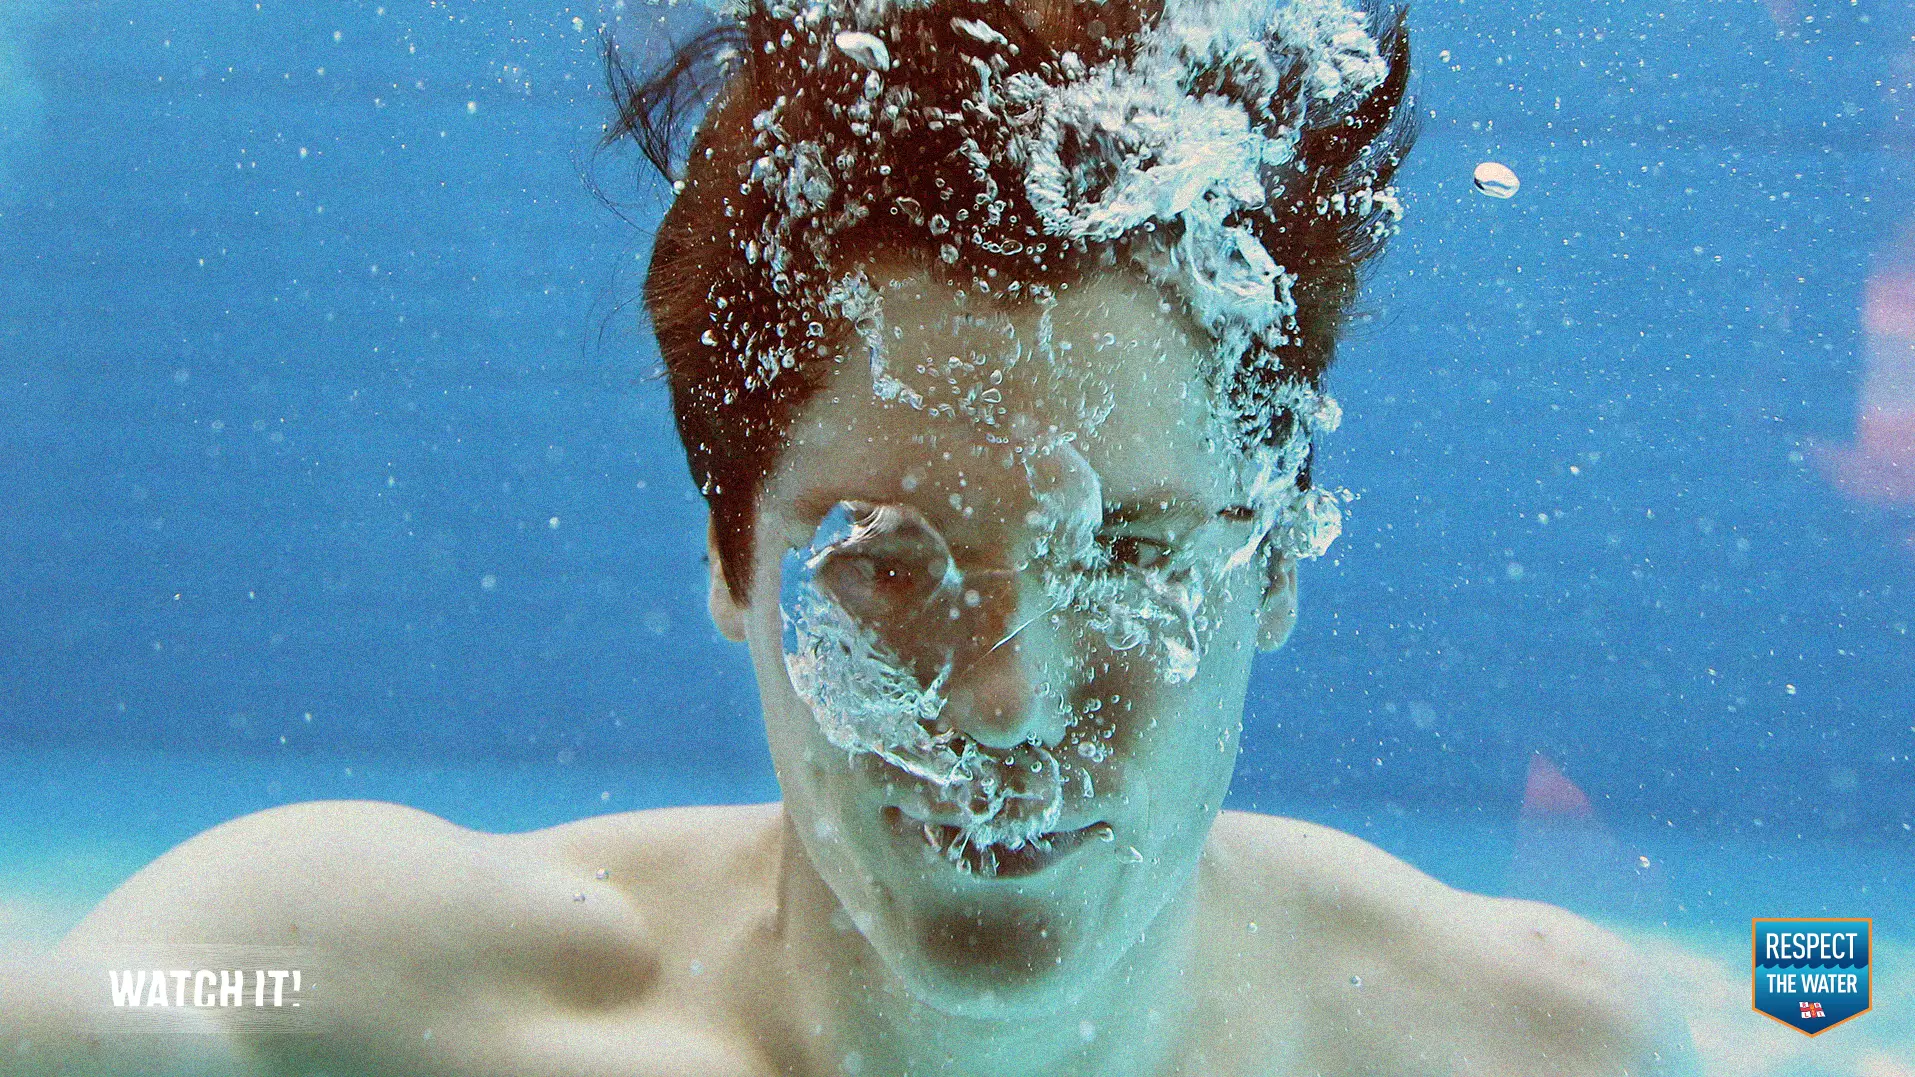 The Simple Mistakes That Could Kill You After Falling Into Cold Water